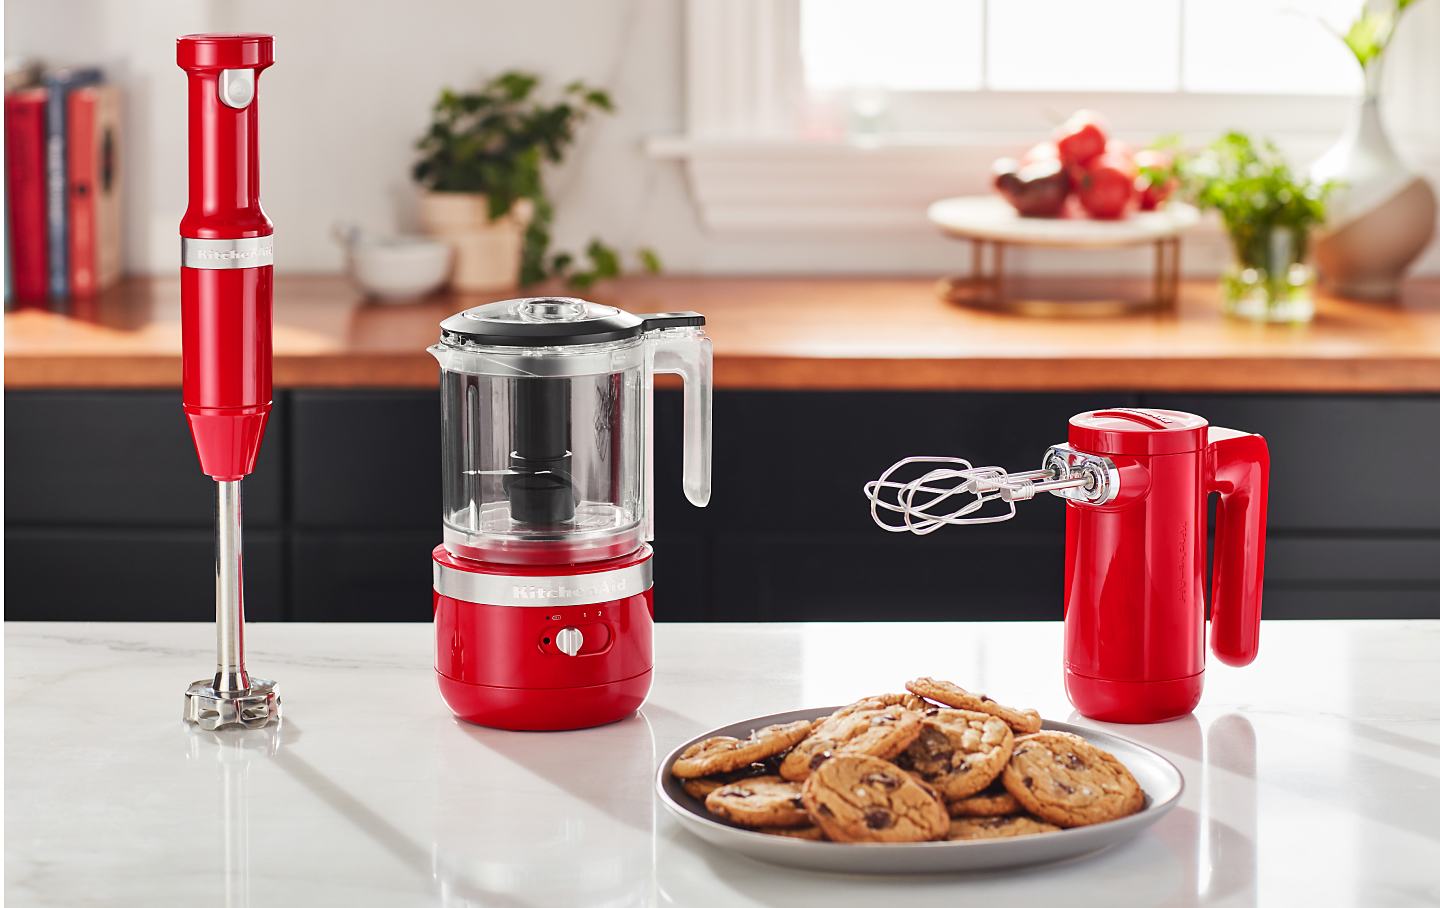 Cordless KitchenAid® hand mixer, hand blender and food chopper next to a plate of freshly baked chocolate chip cookies.